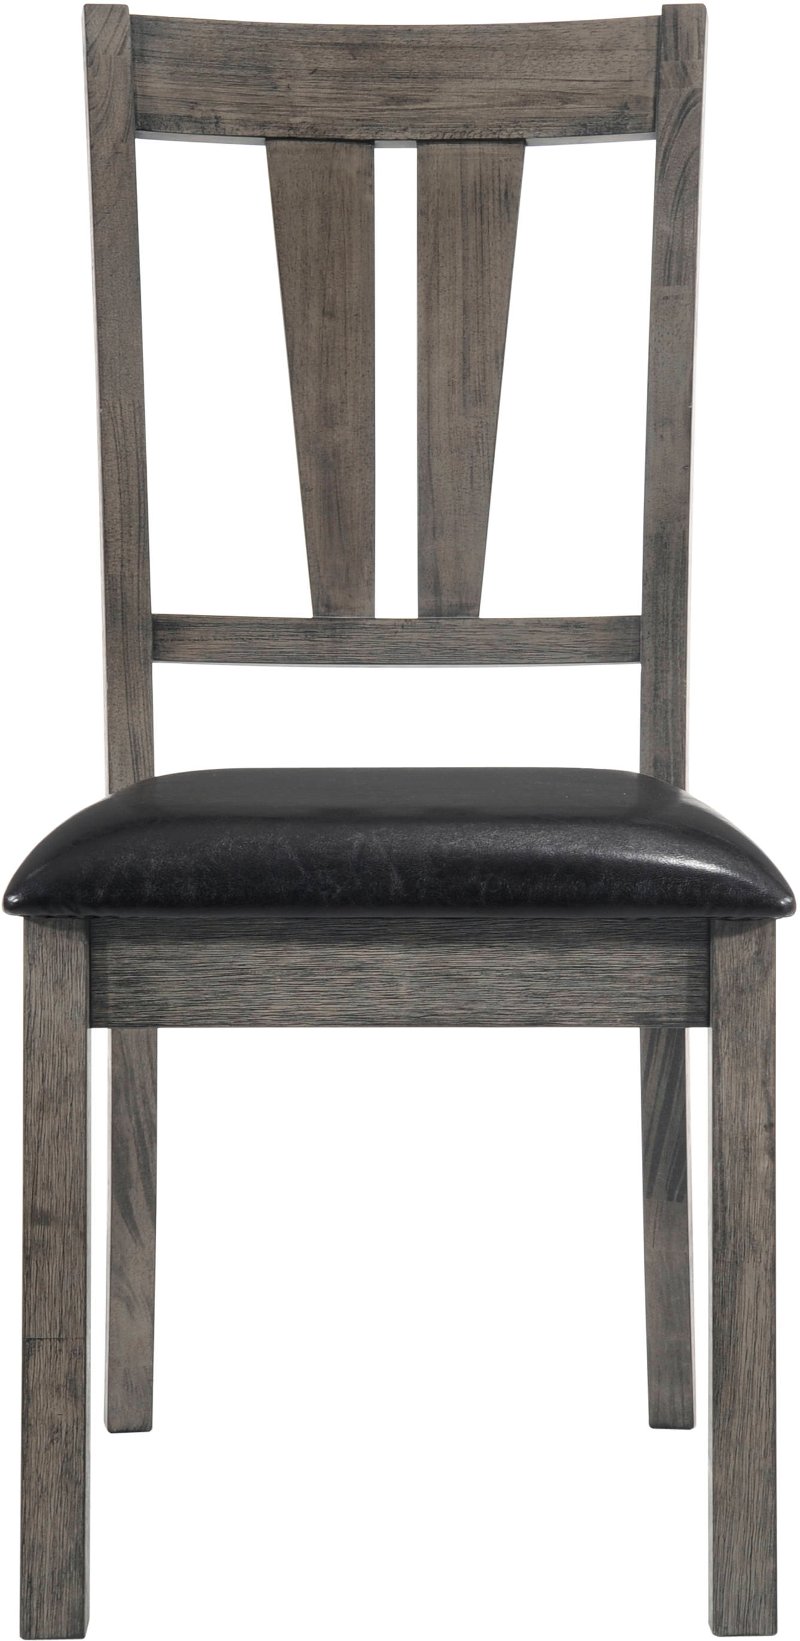 Rustic Gray Upholstered Dining Room, Rustic Upholstered Dining Room Chairs